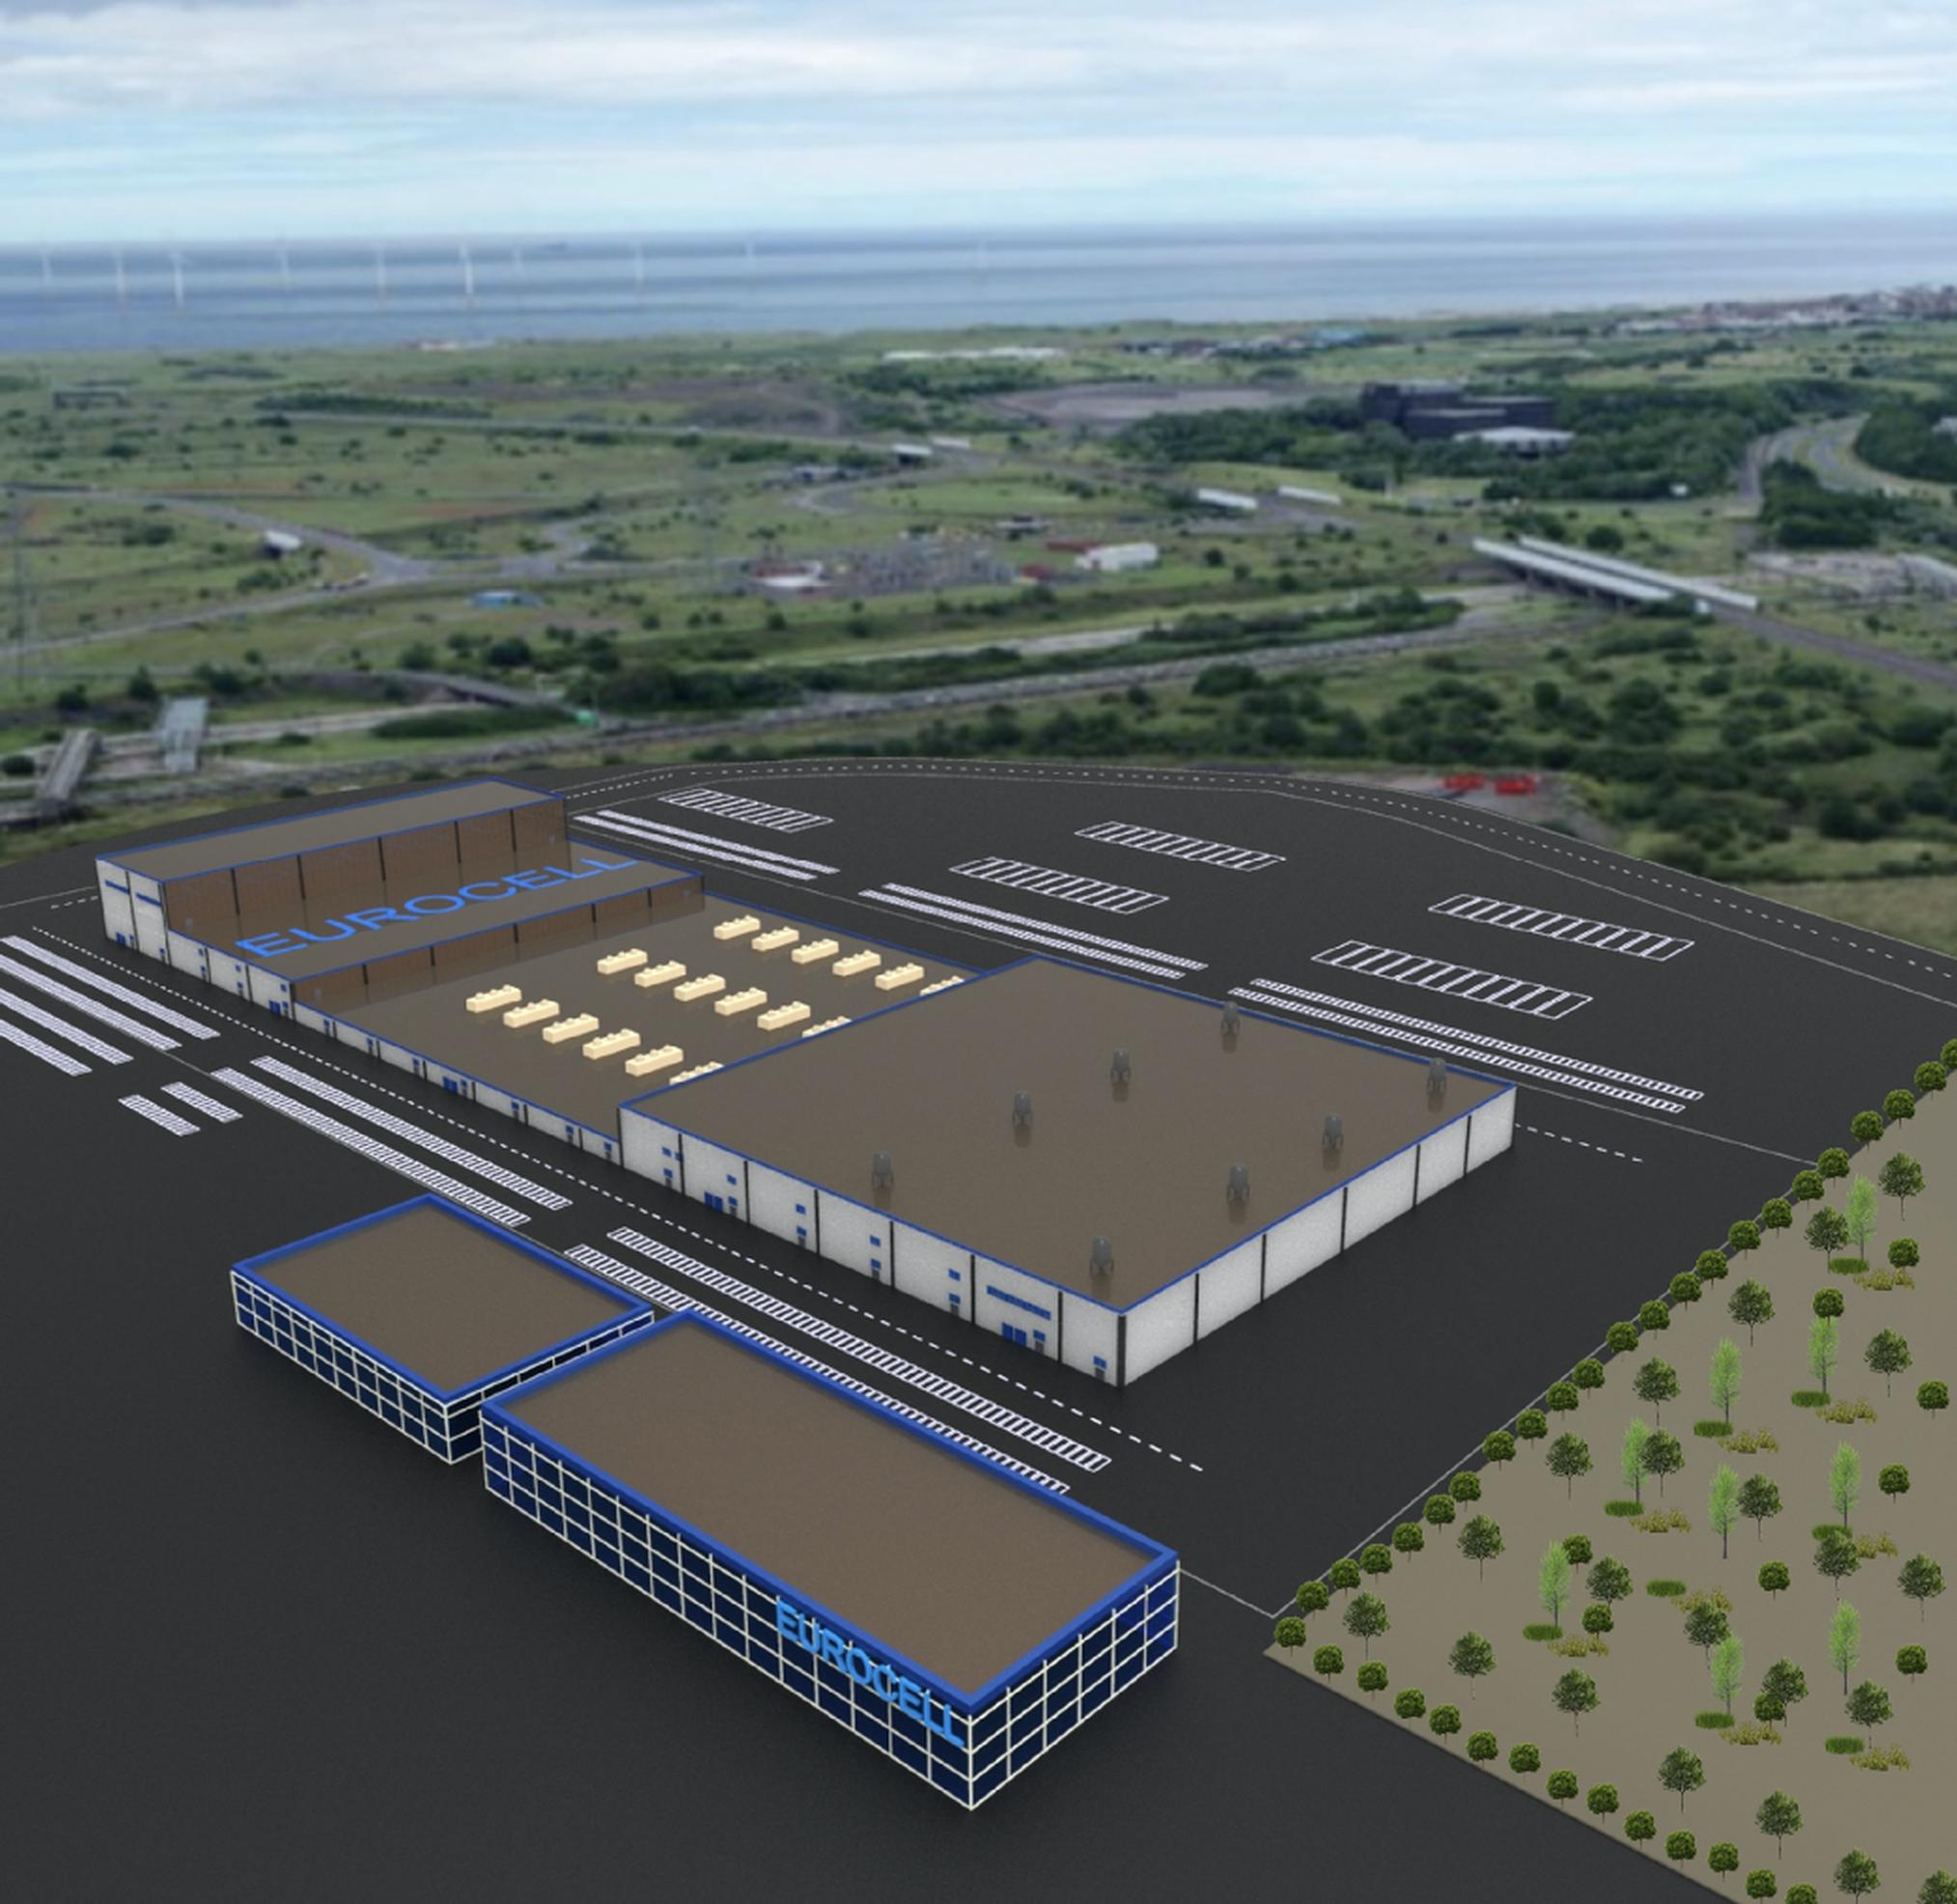 Rendering of the Eurocell gigafactory